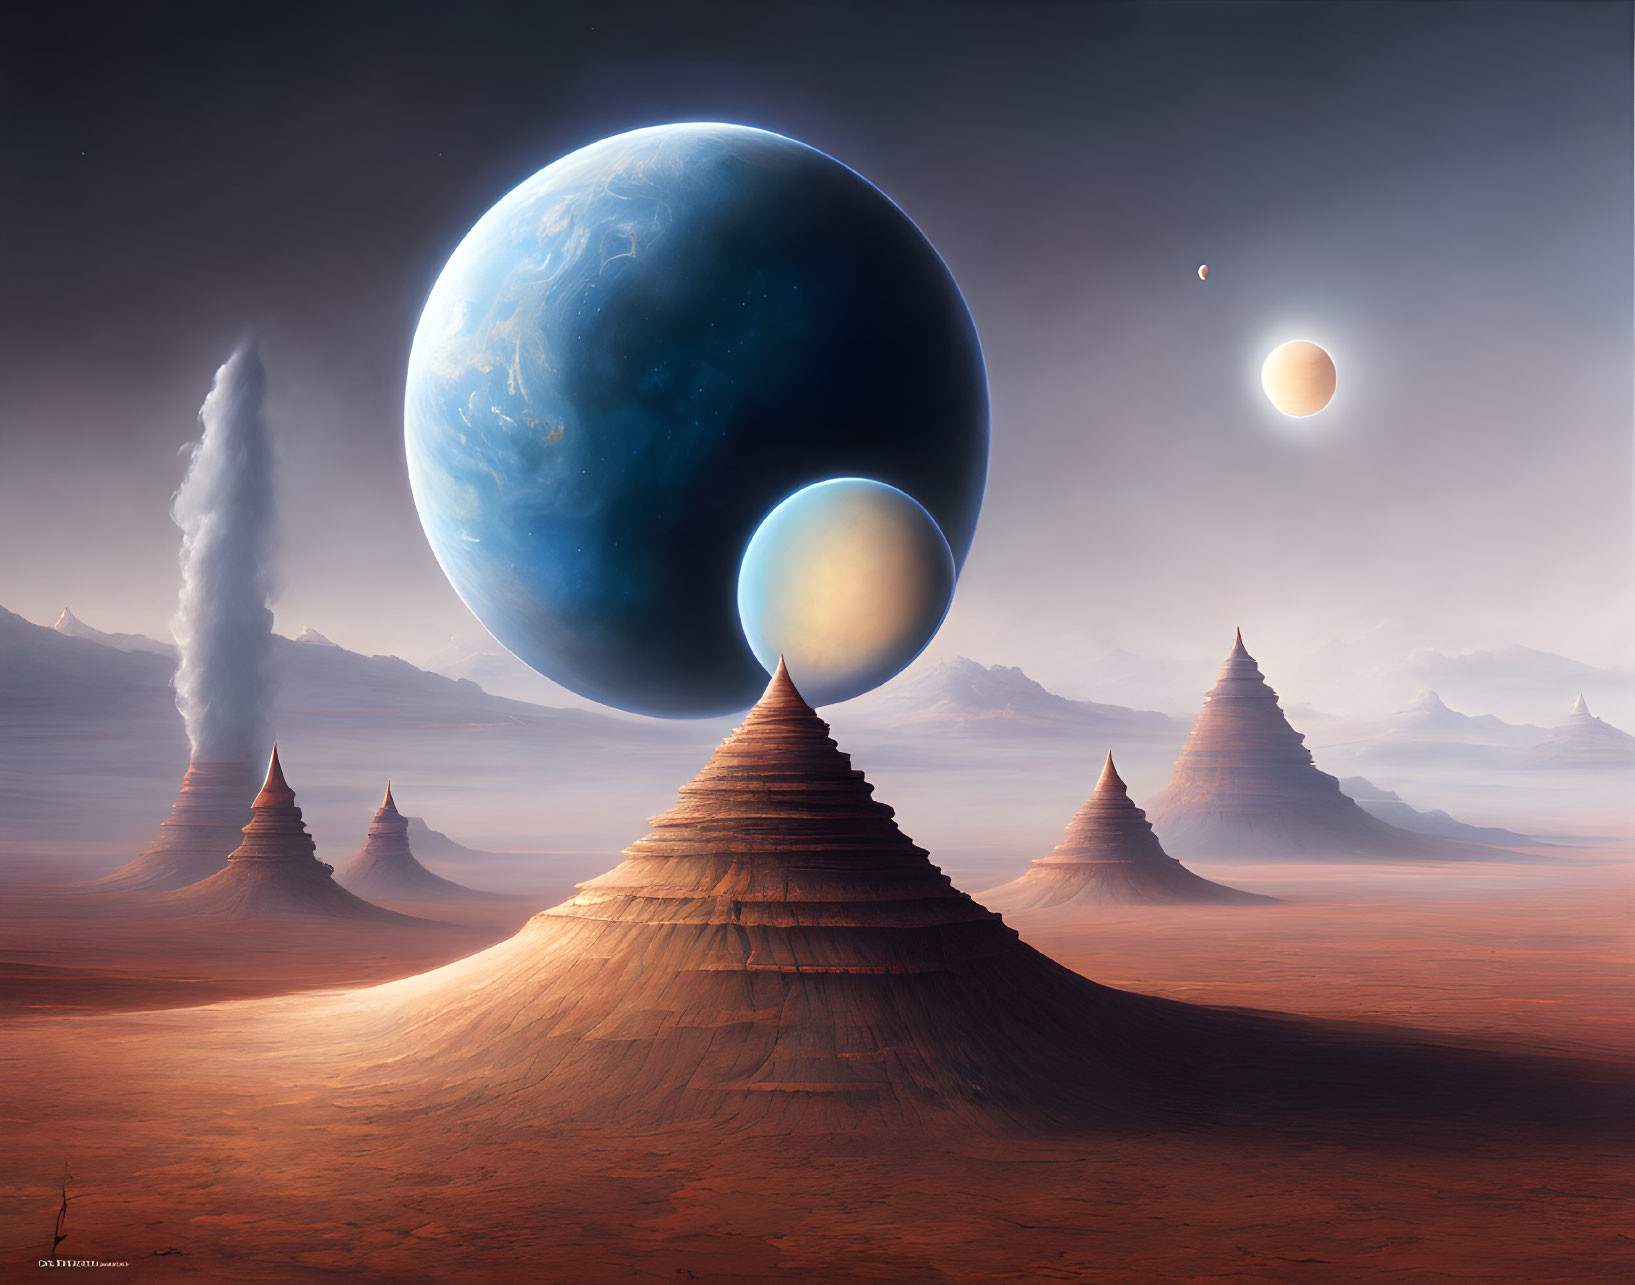 Fantastical landscape with cone-shaped mountains, oversized planet, two moons, and spaceship.